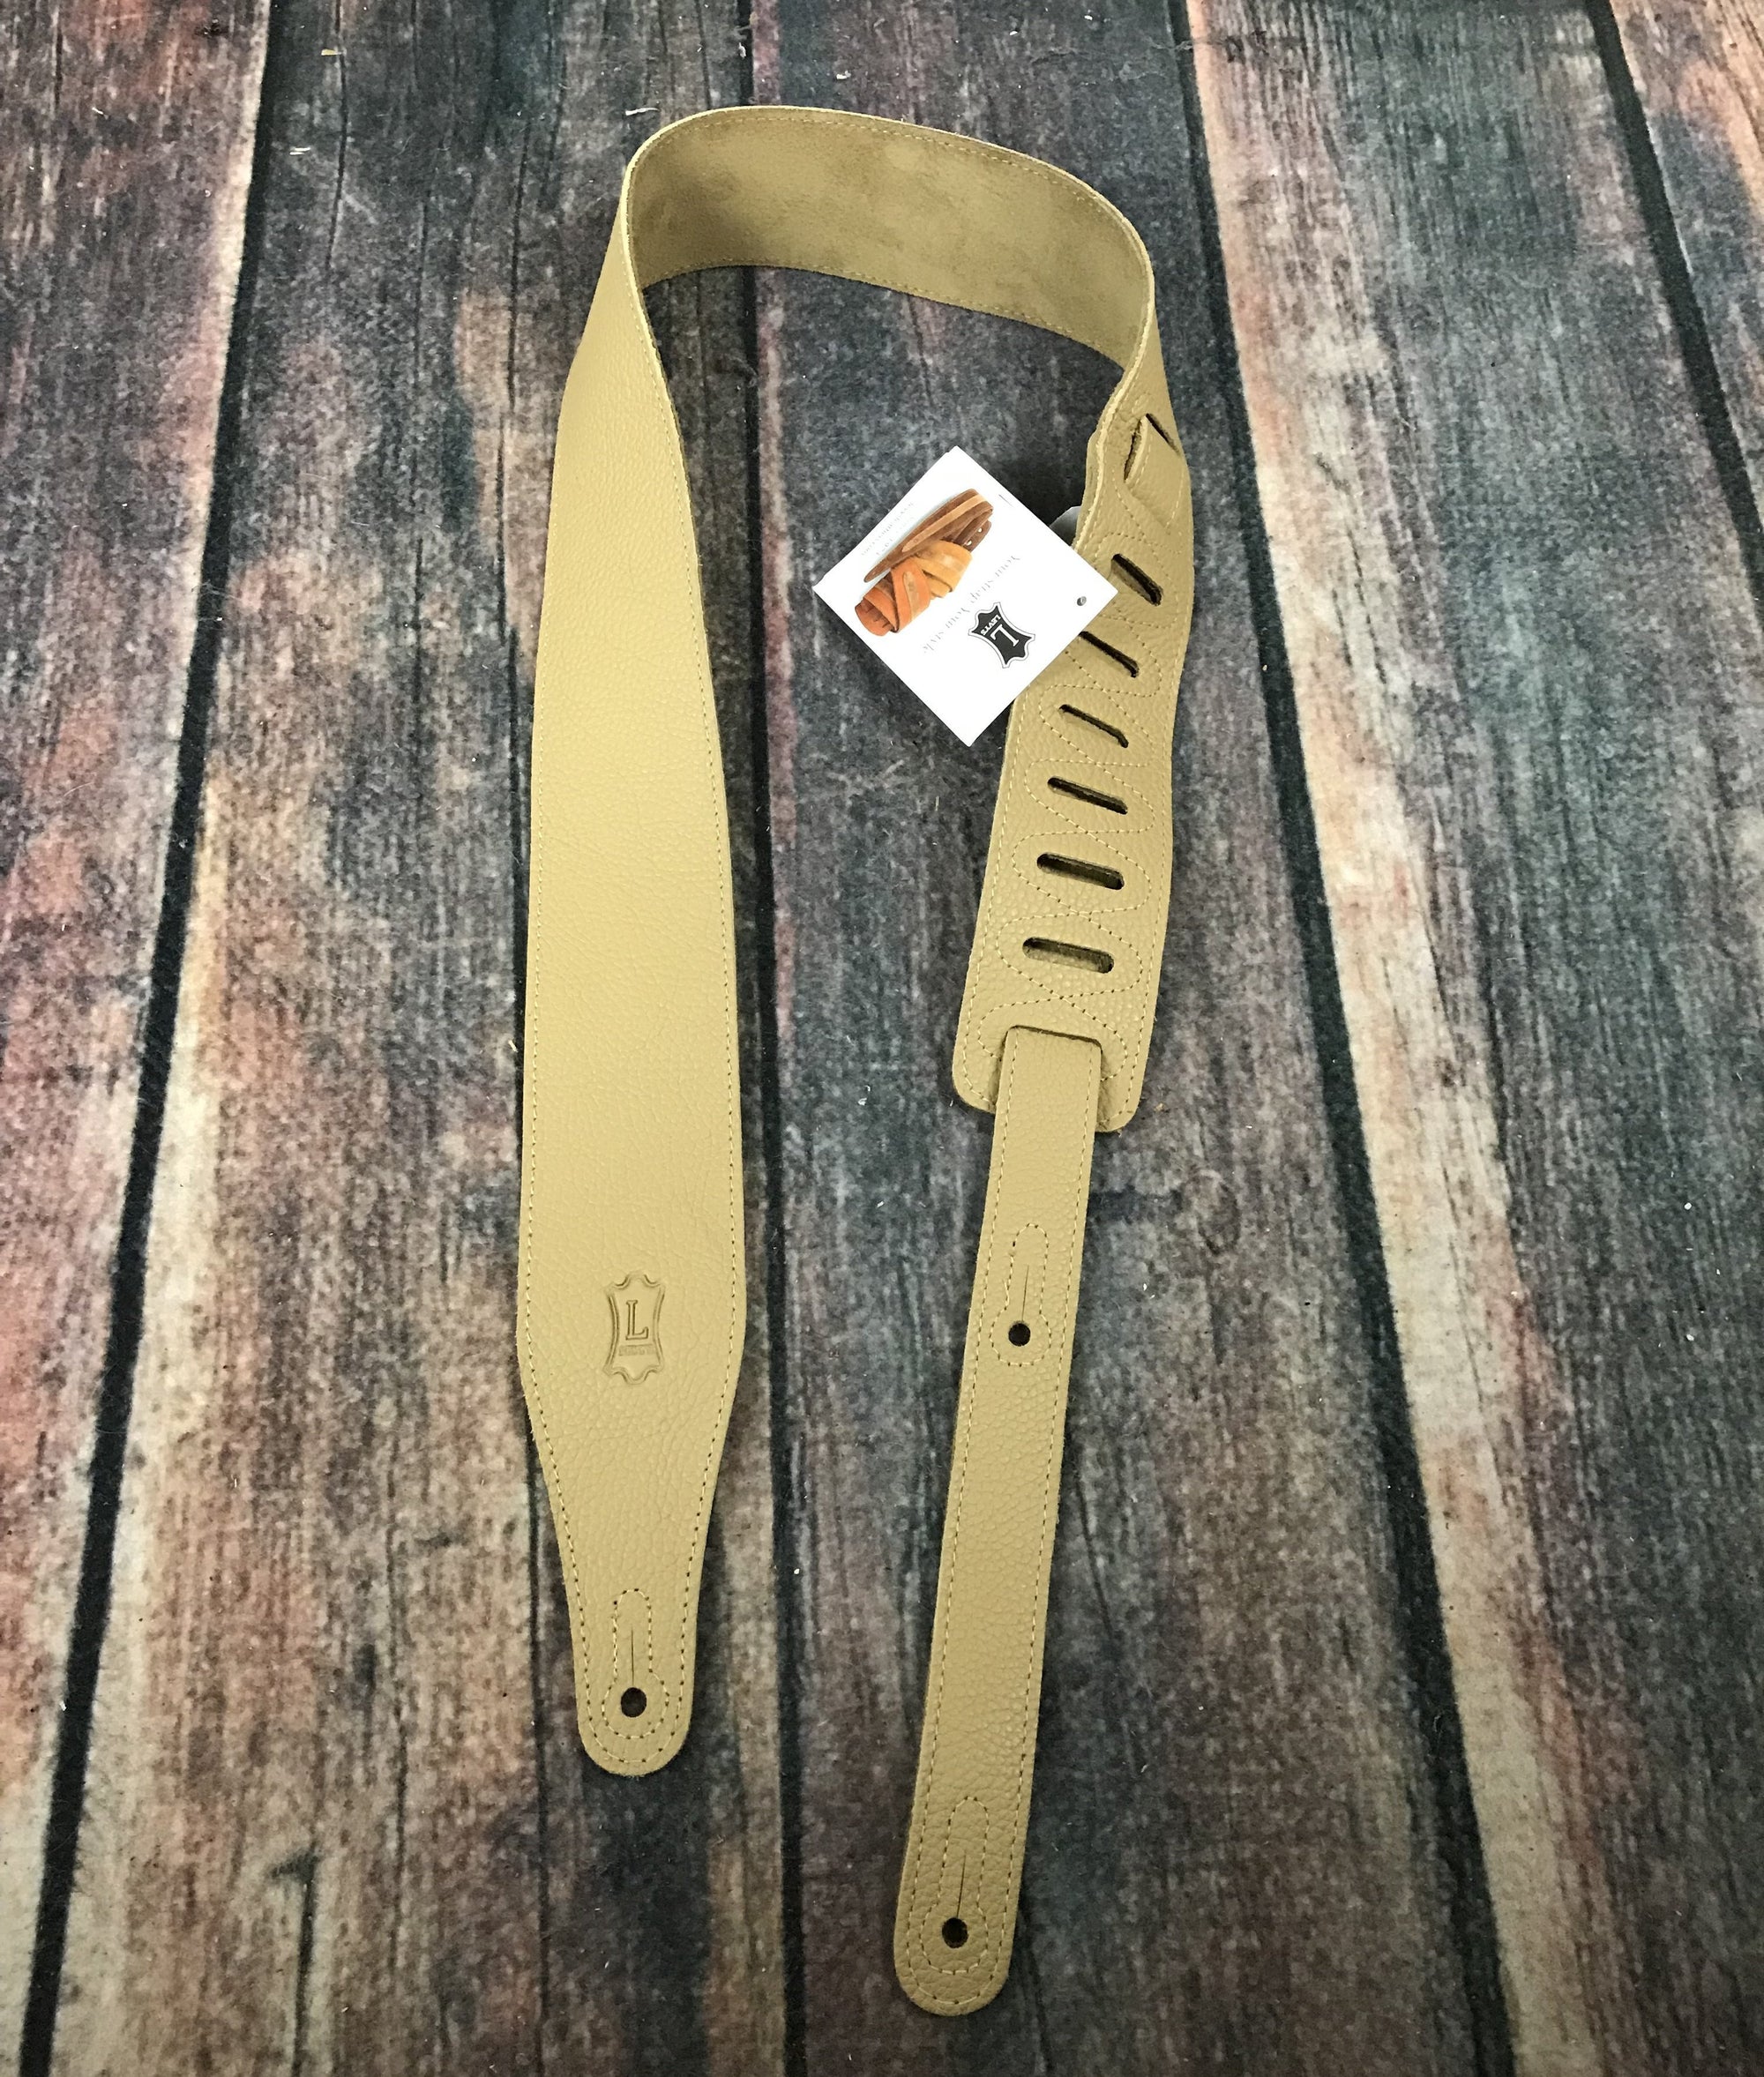 Levys strap Levys M17BLS-BUF Genuine Texas Steer Hide Pebbled Leather Strap- Buff with Suede Back